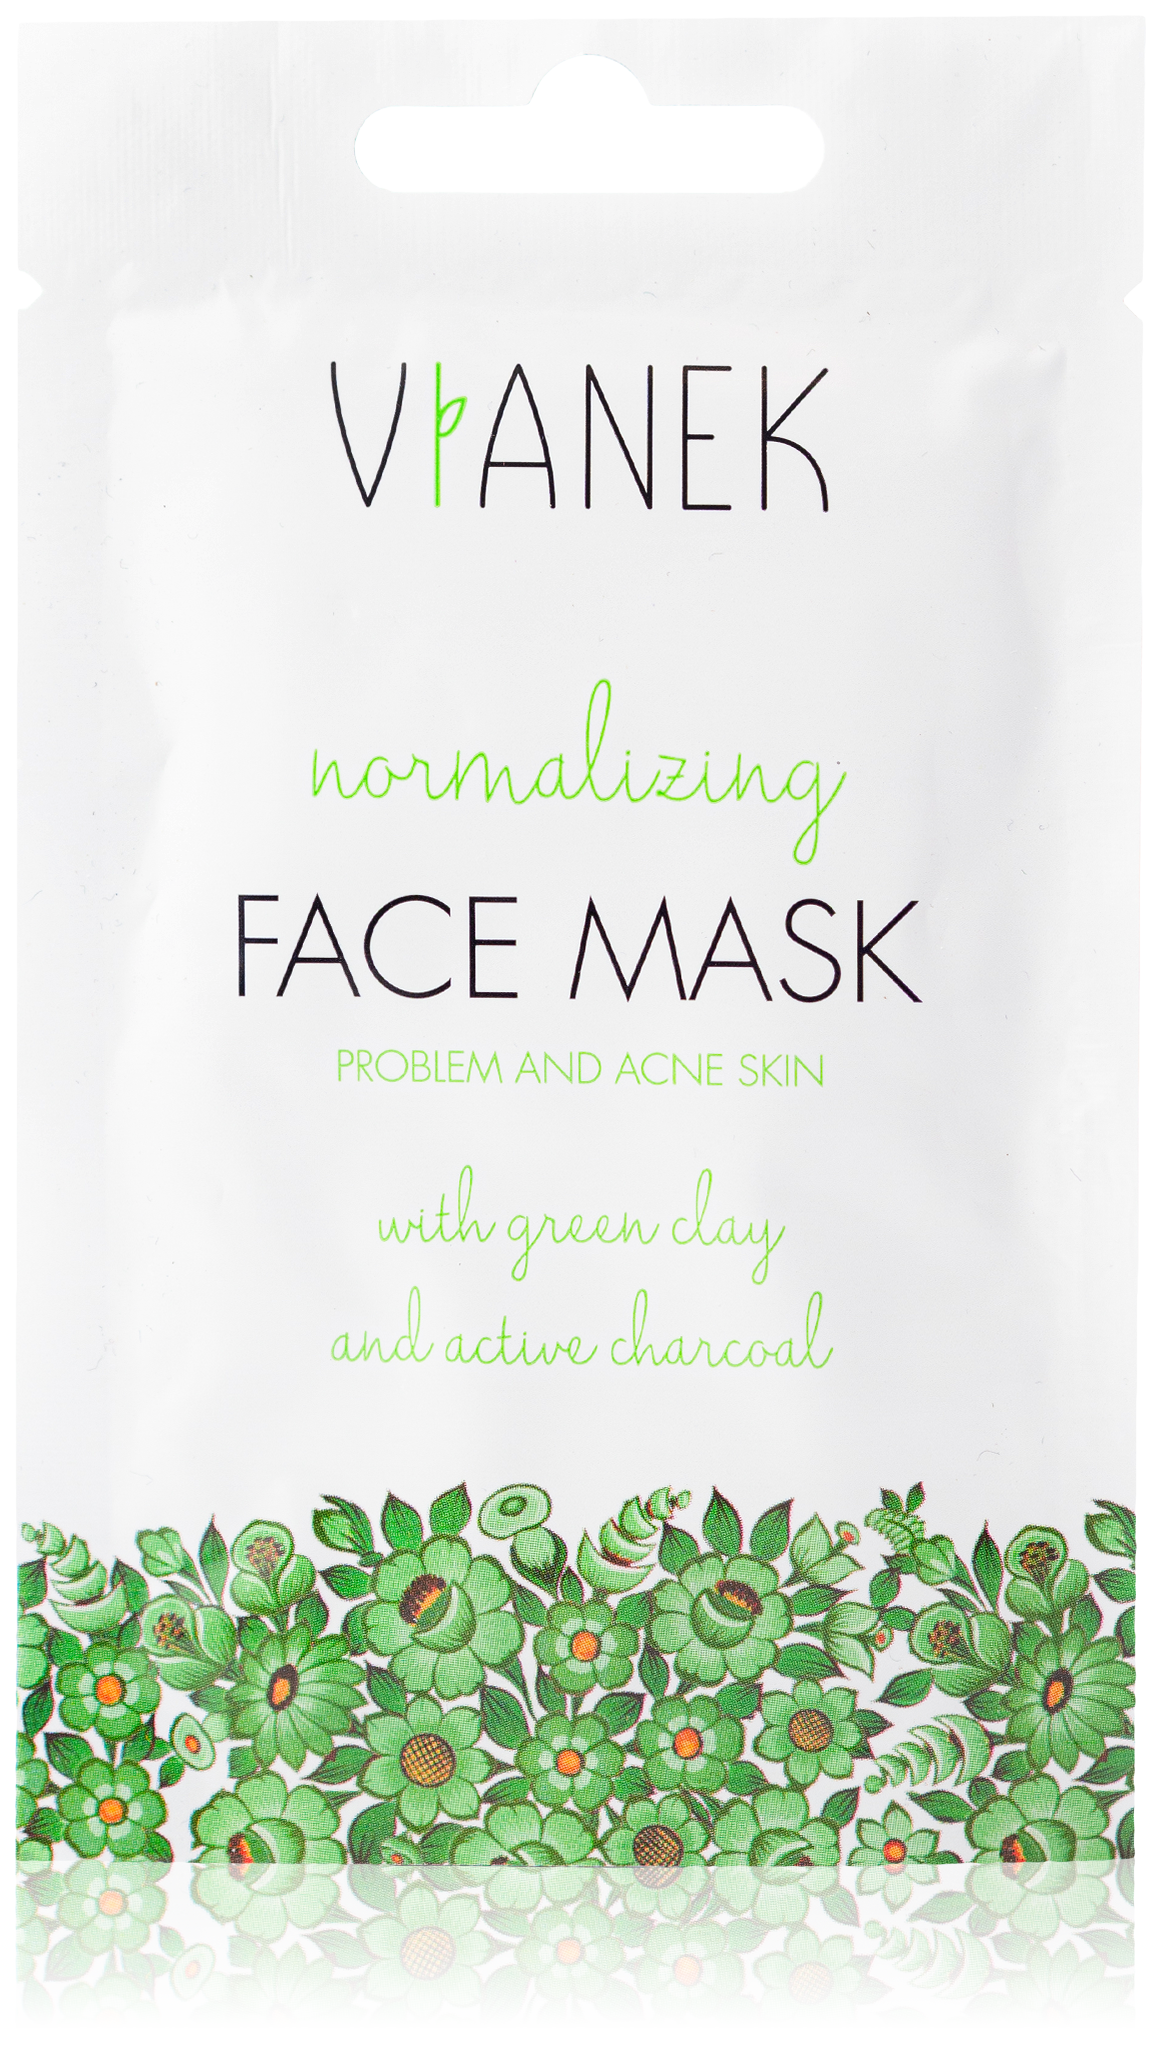 Normalizing Face Mask for Problem & Acne Skin